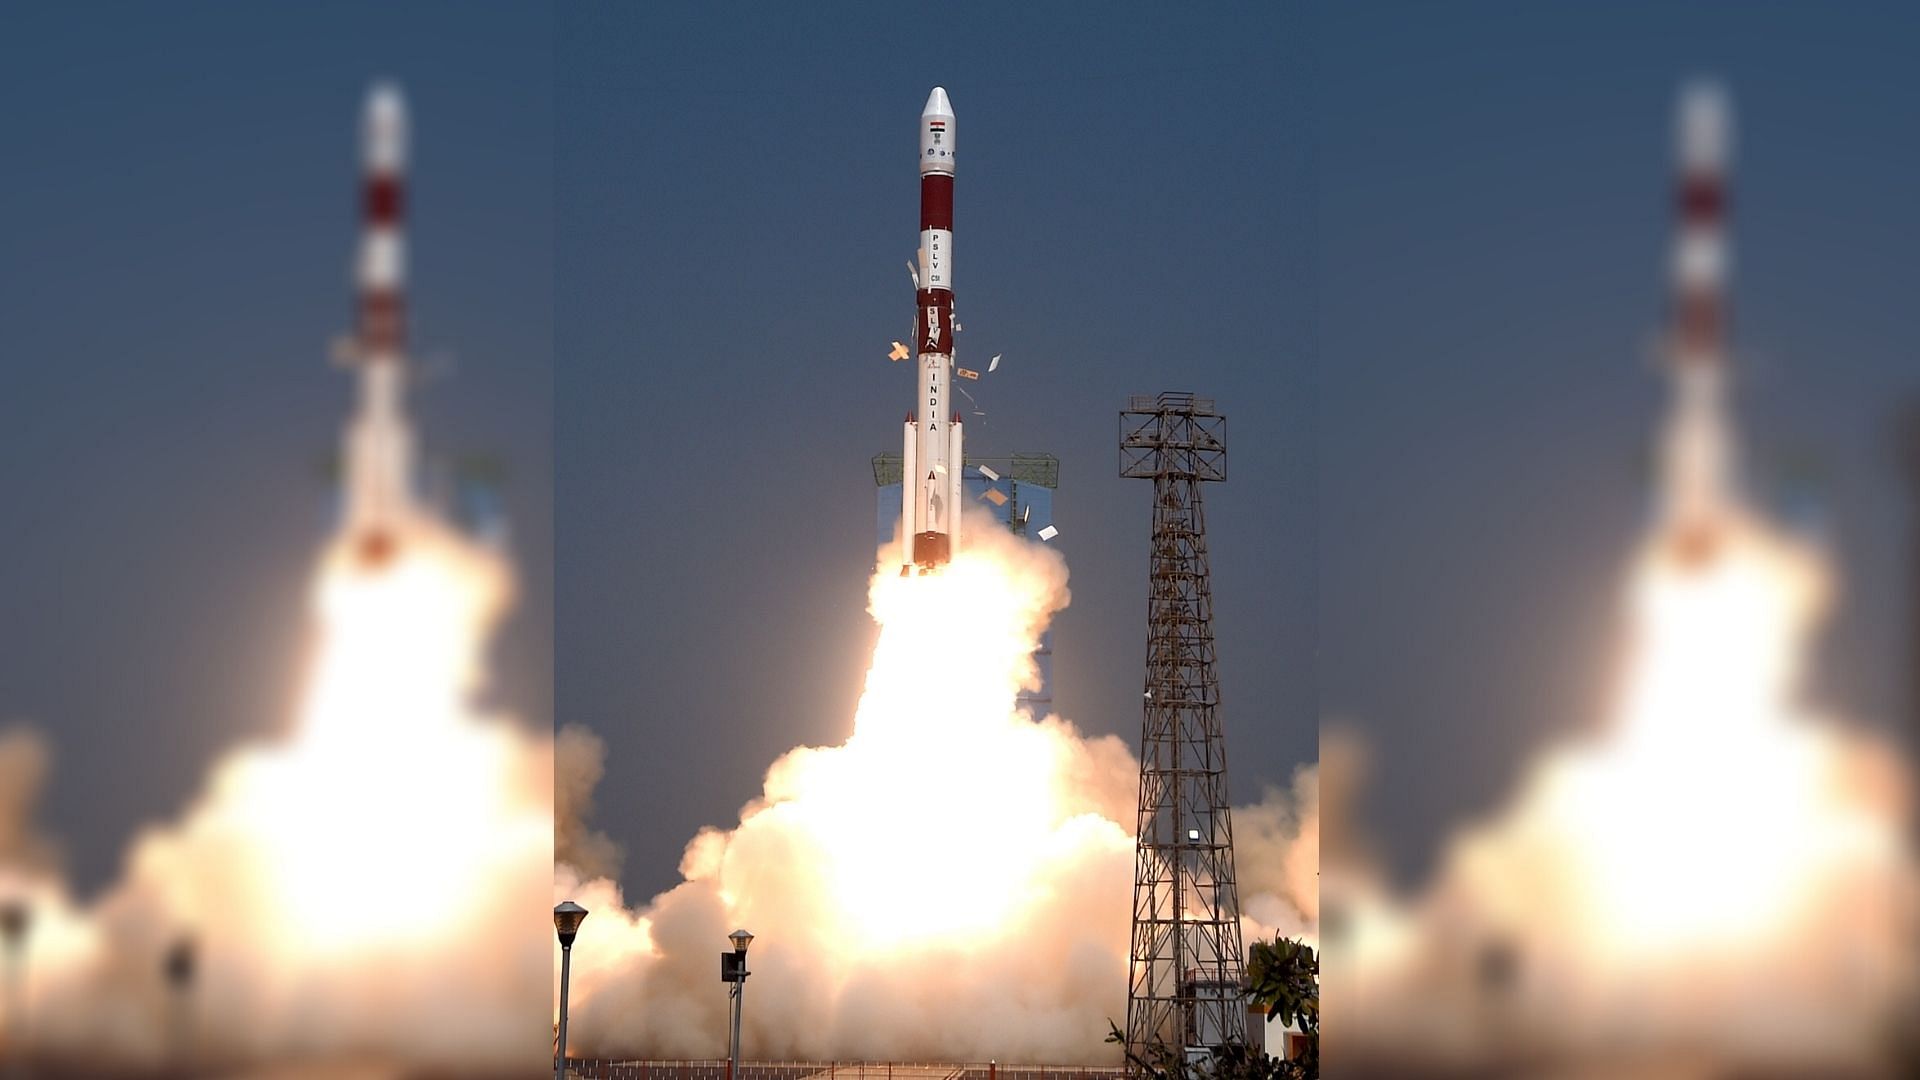 The Indian Space Research Organisation launched the Amazonia-1 satellite of Brazil on Sunday, 28 February.